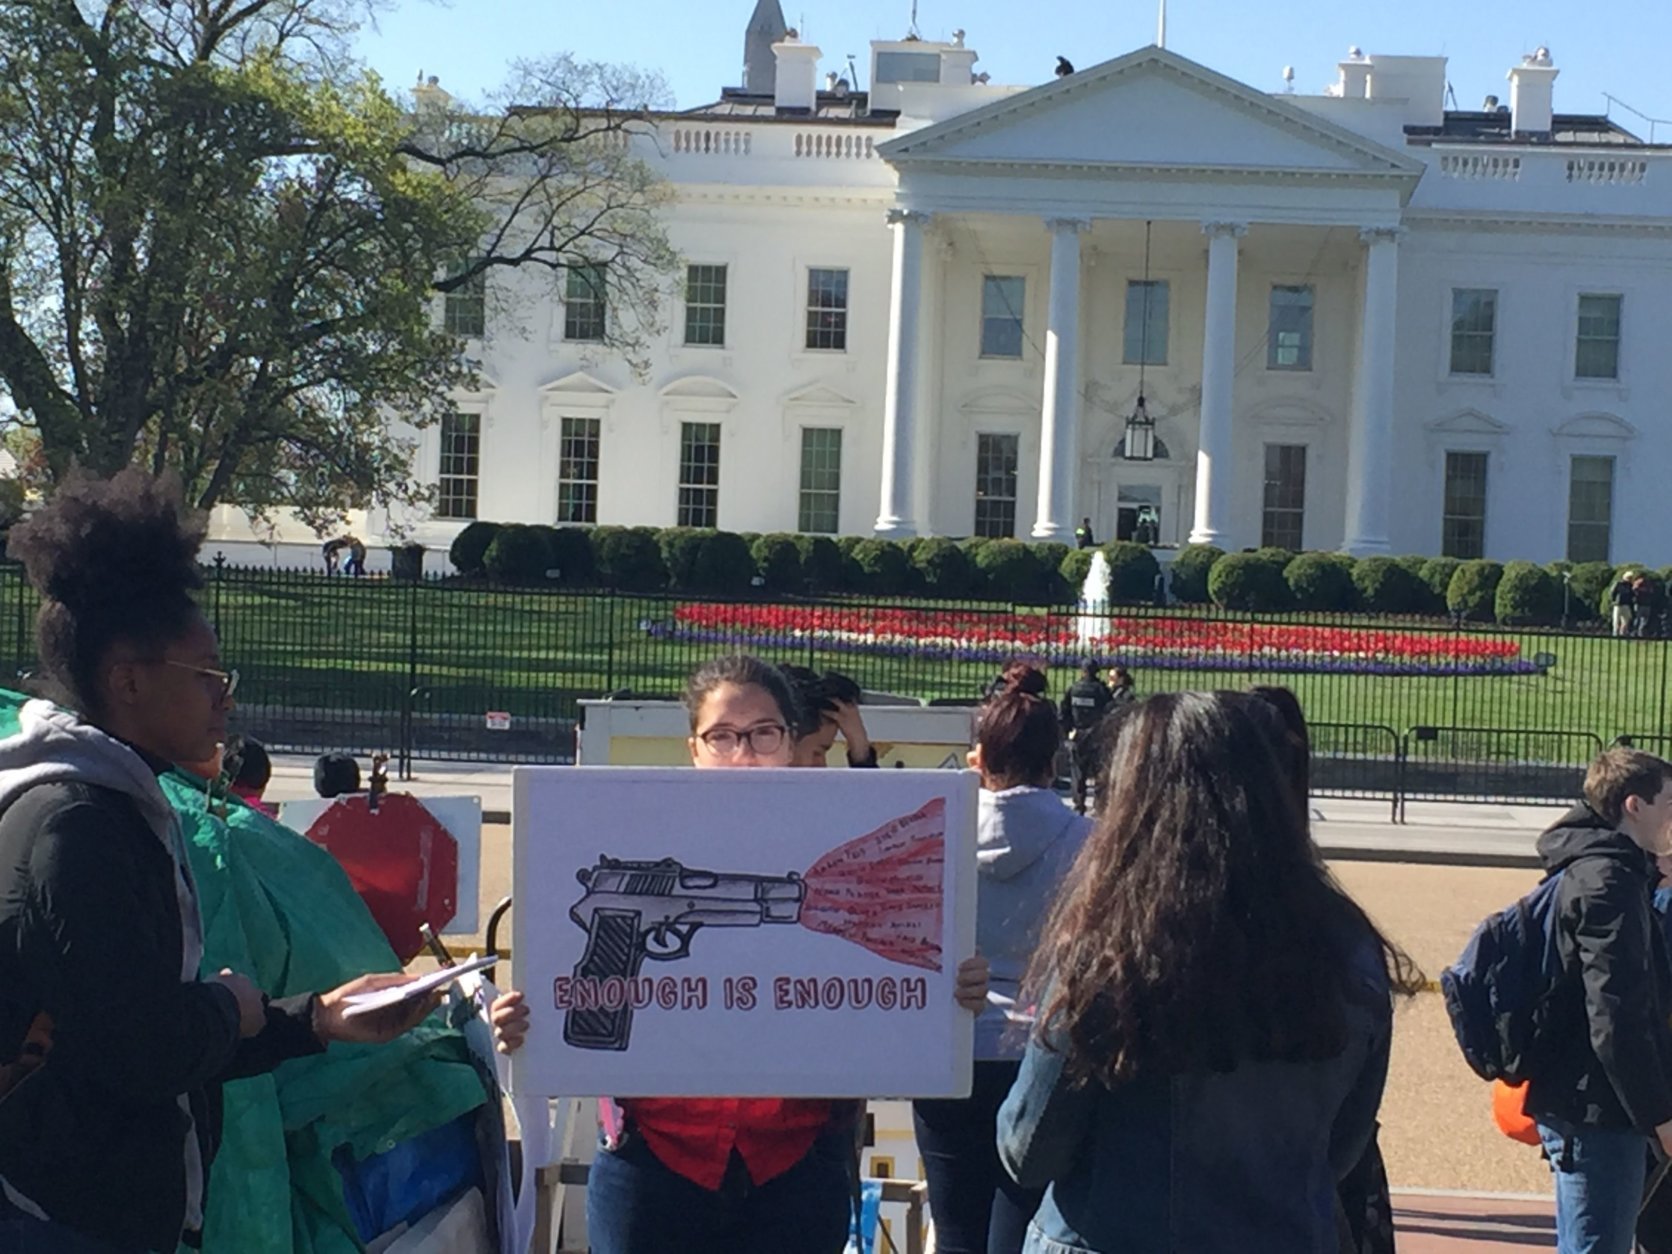 A student protester holds a sign that says, "Enough is enough" in front of the White House. (WTOP/John Domen) 